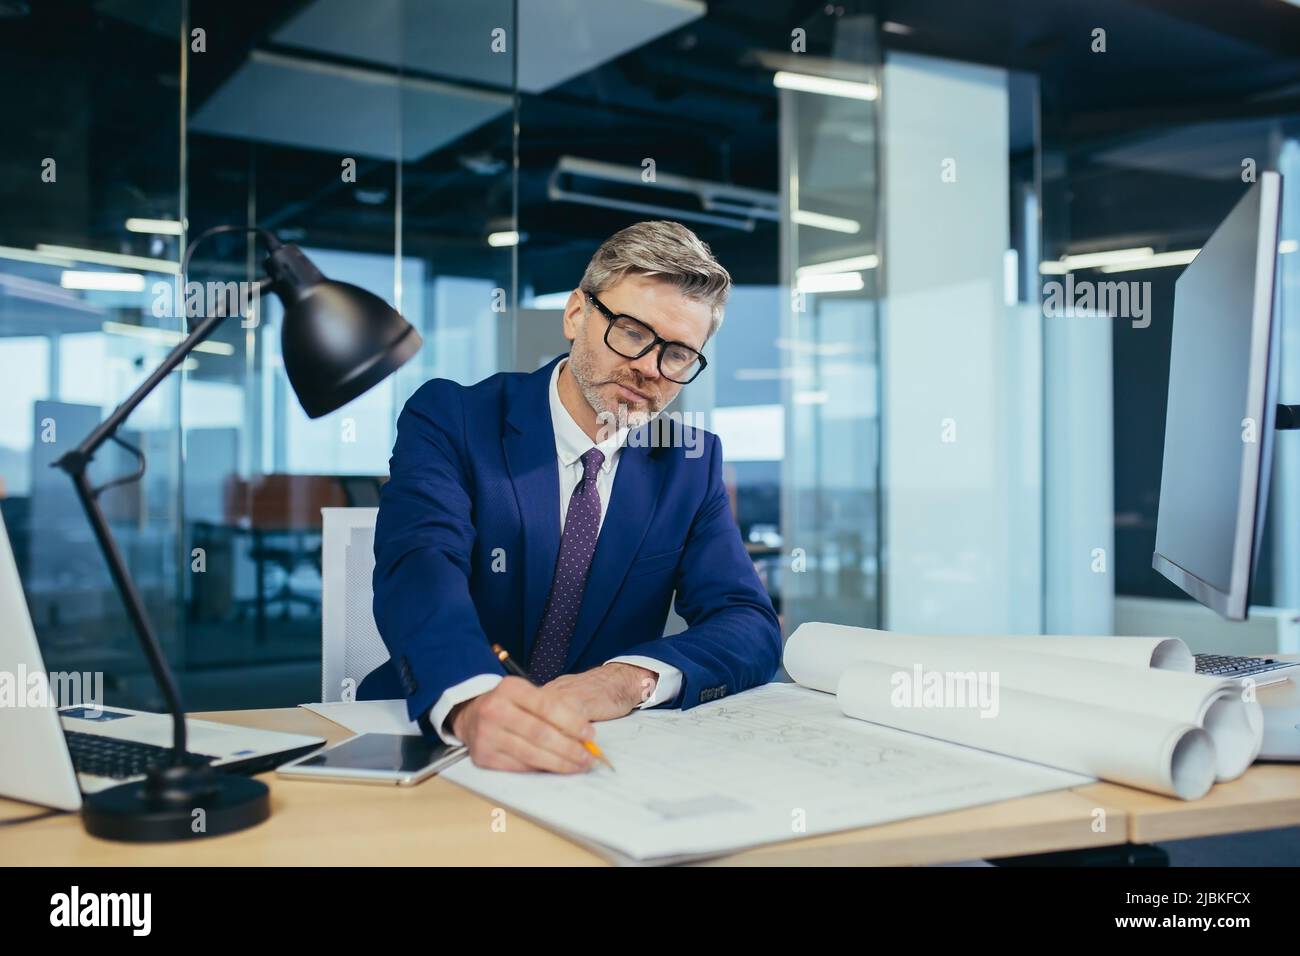 Successful and experienced male designer working in the office on the project, making adjustments to the layout plan Stock Photo